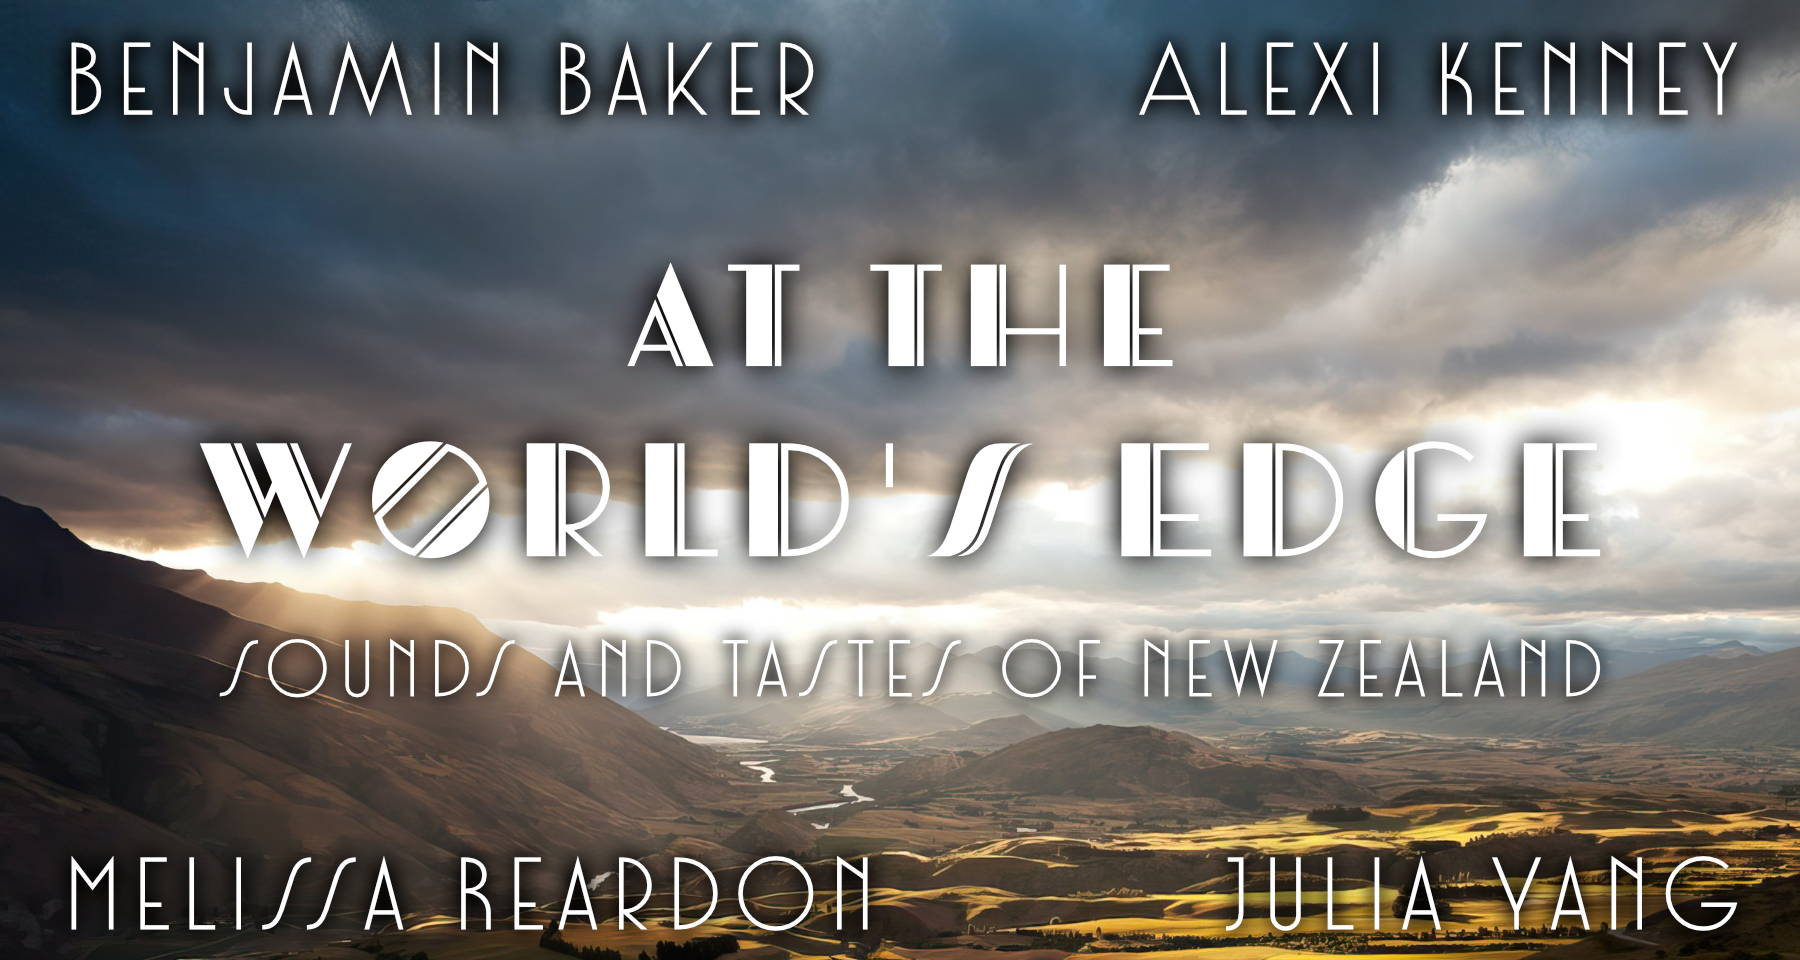 At The World's Edge - Sounds and Tastes of New Zealand